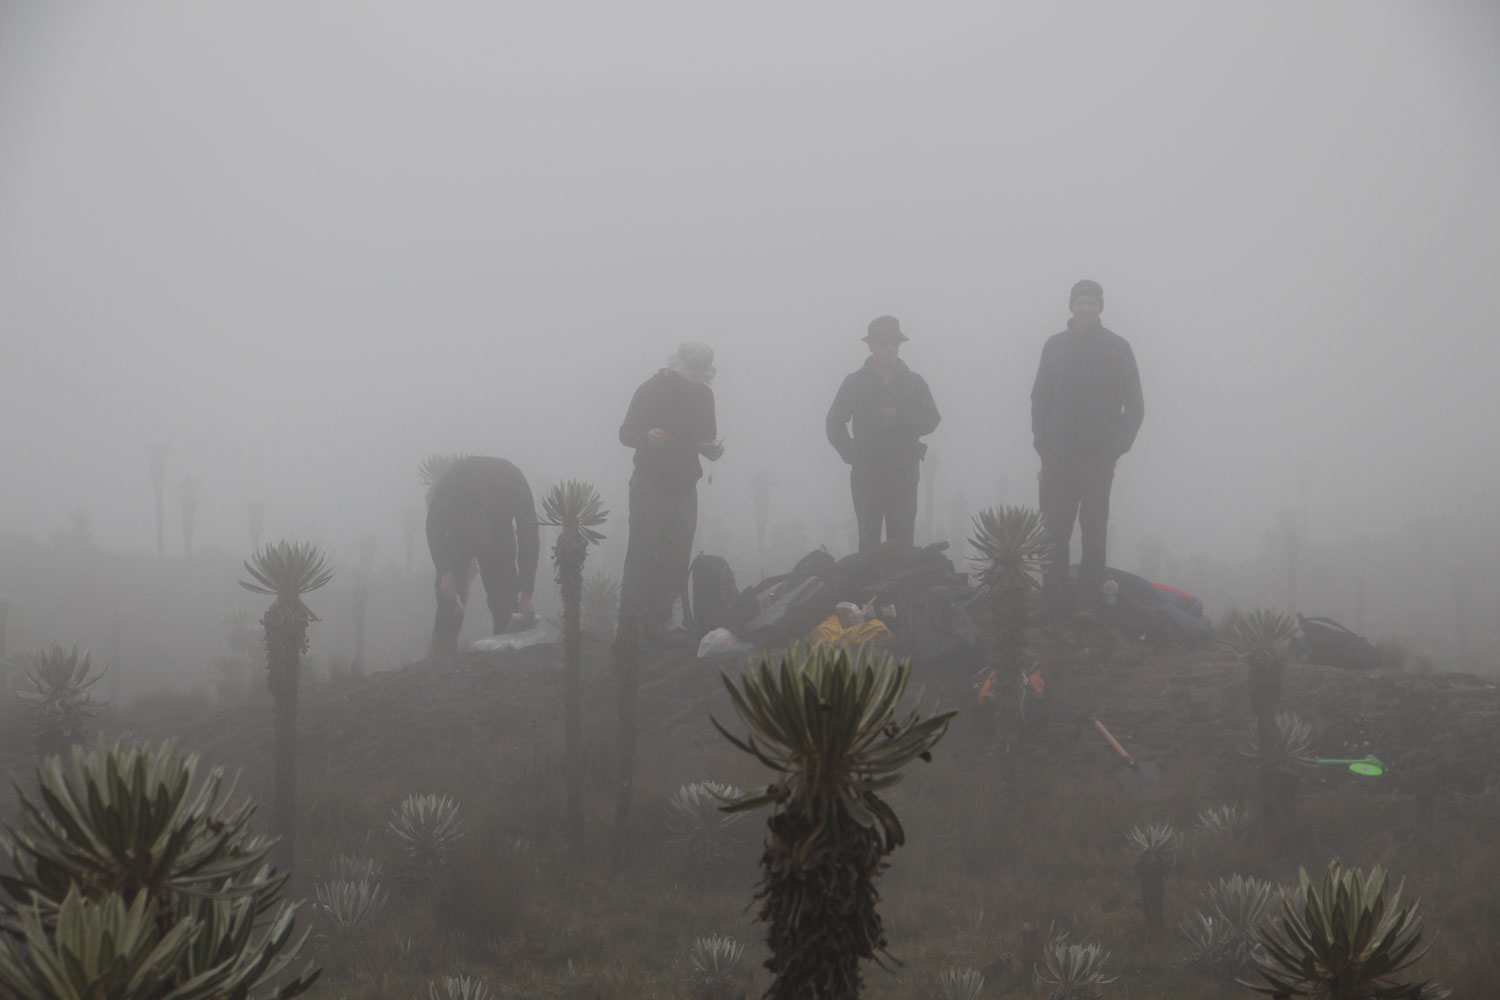 Researchers in the fog